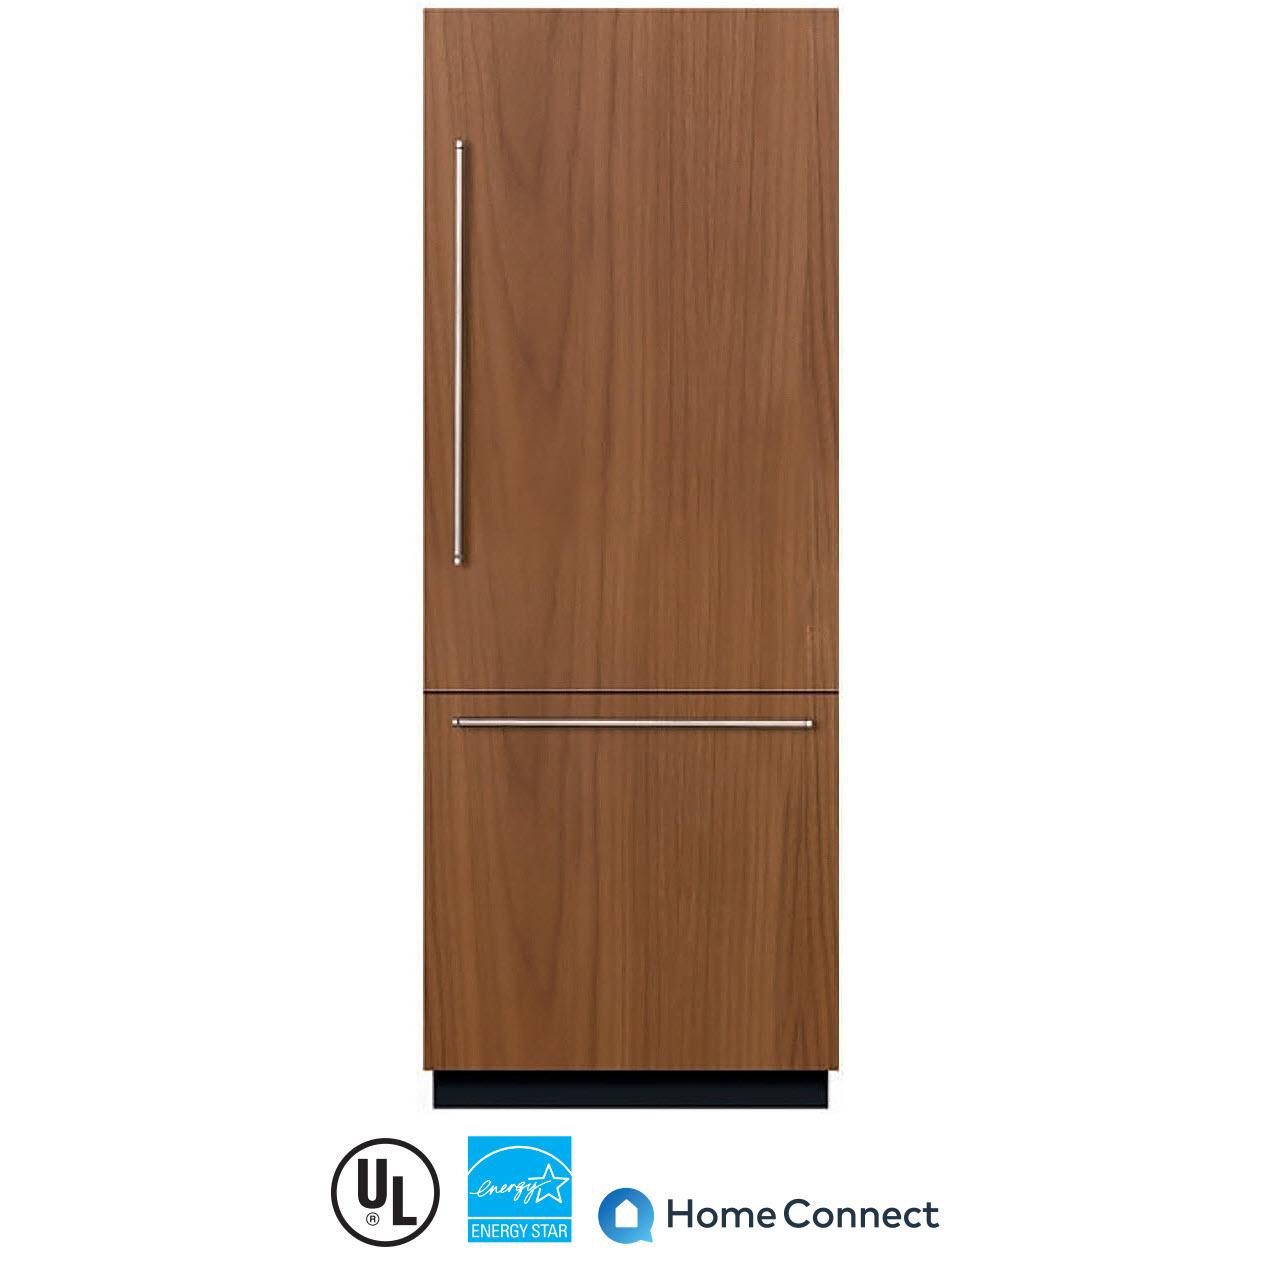 Bosch 30-inch, 16 cu.ft. Built-in Bottom Freezer Refrigerator with Home Connect? B30IB905SP